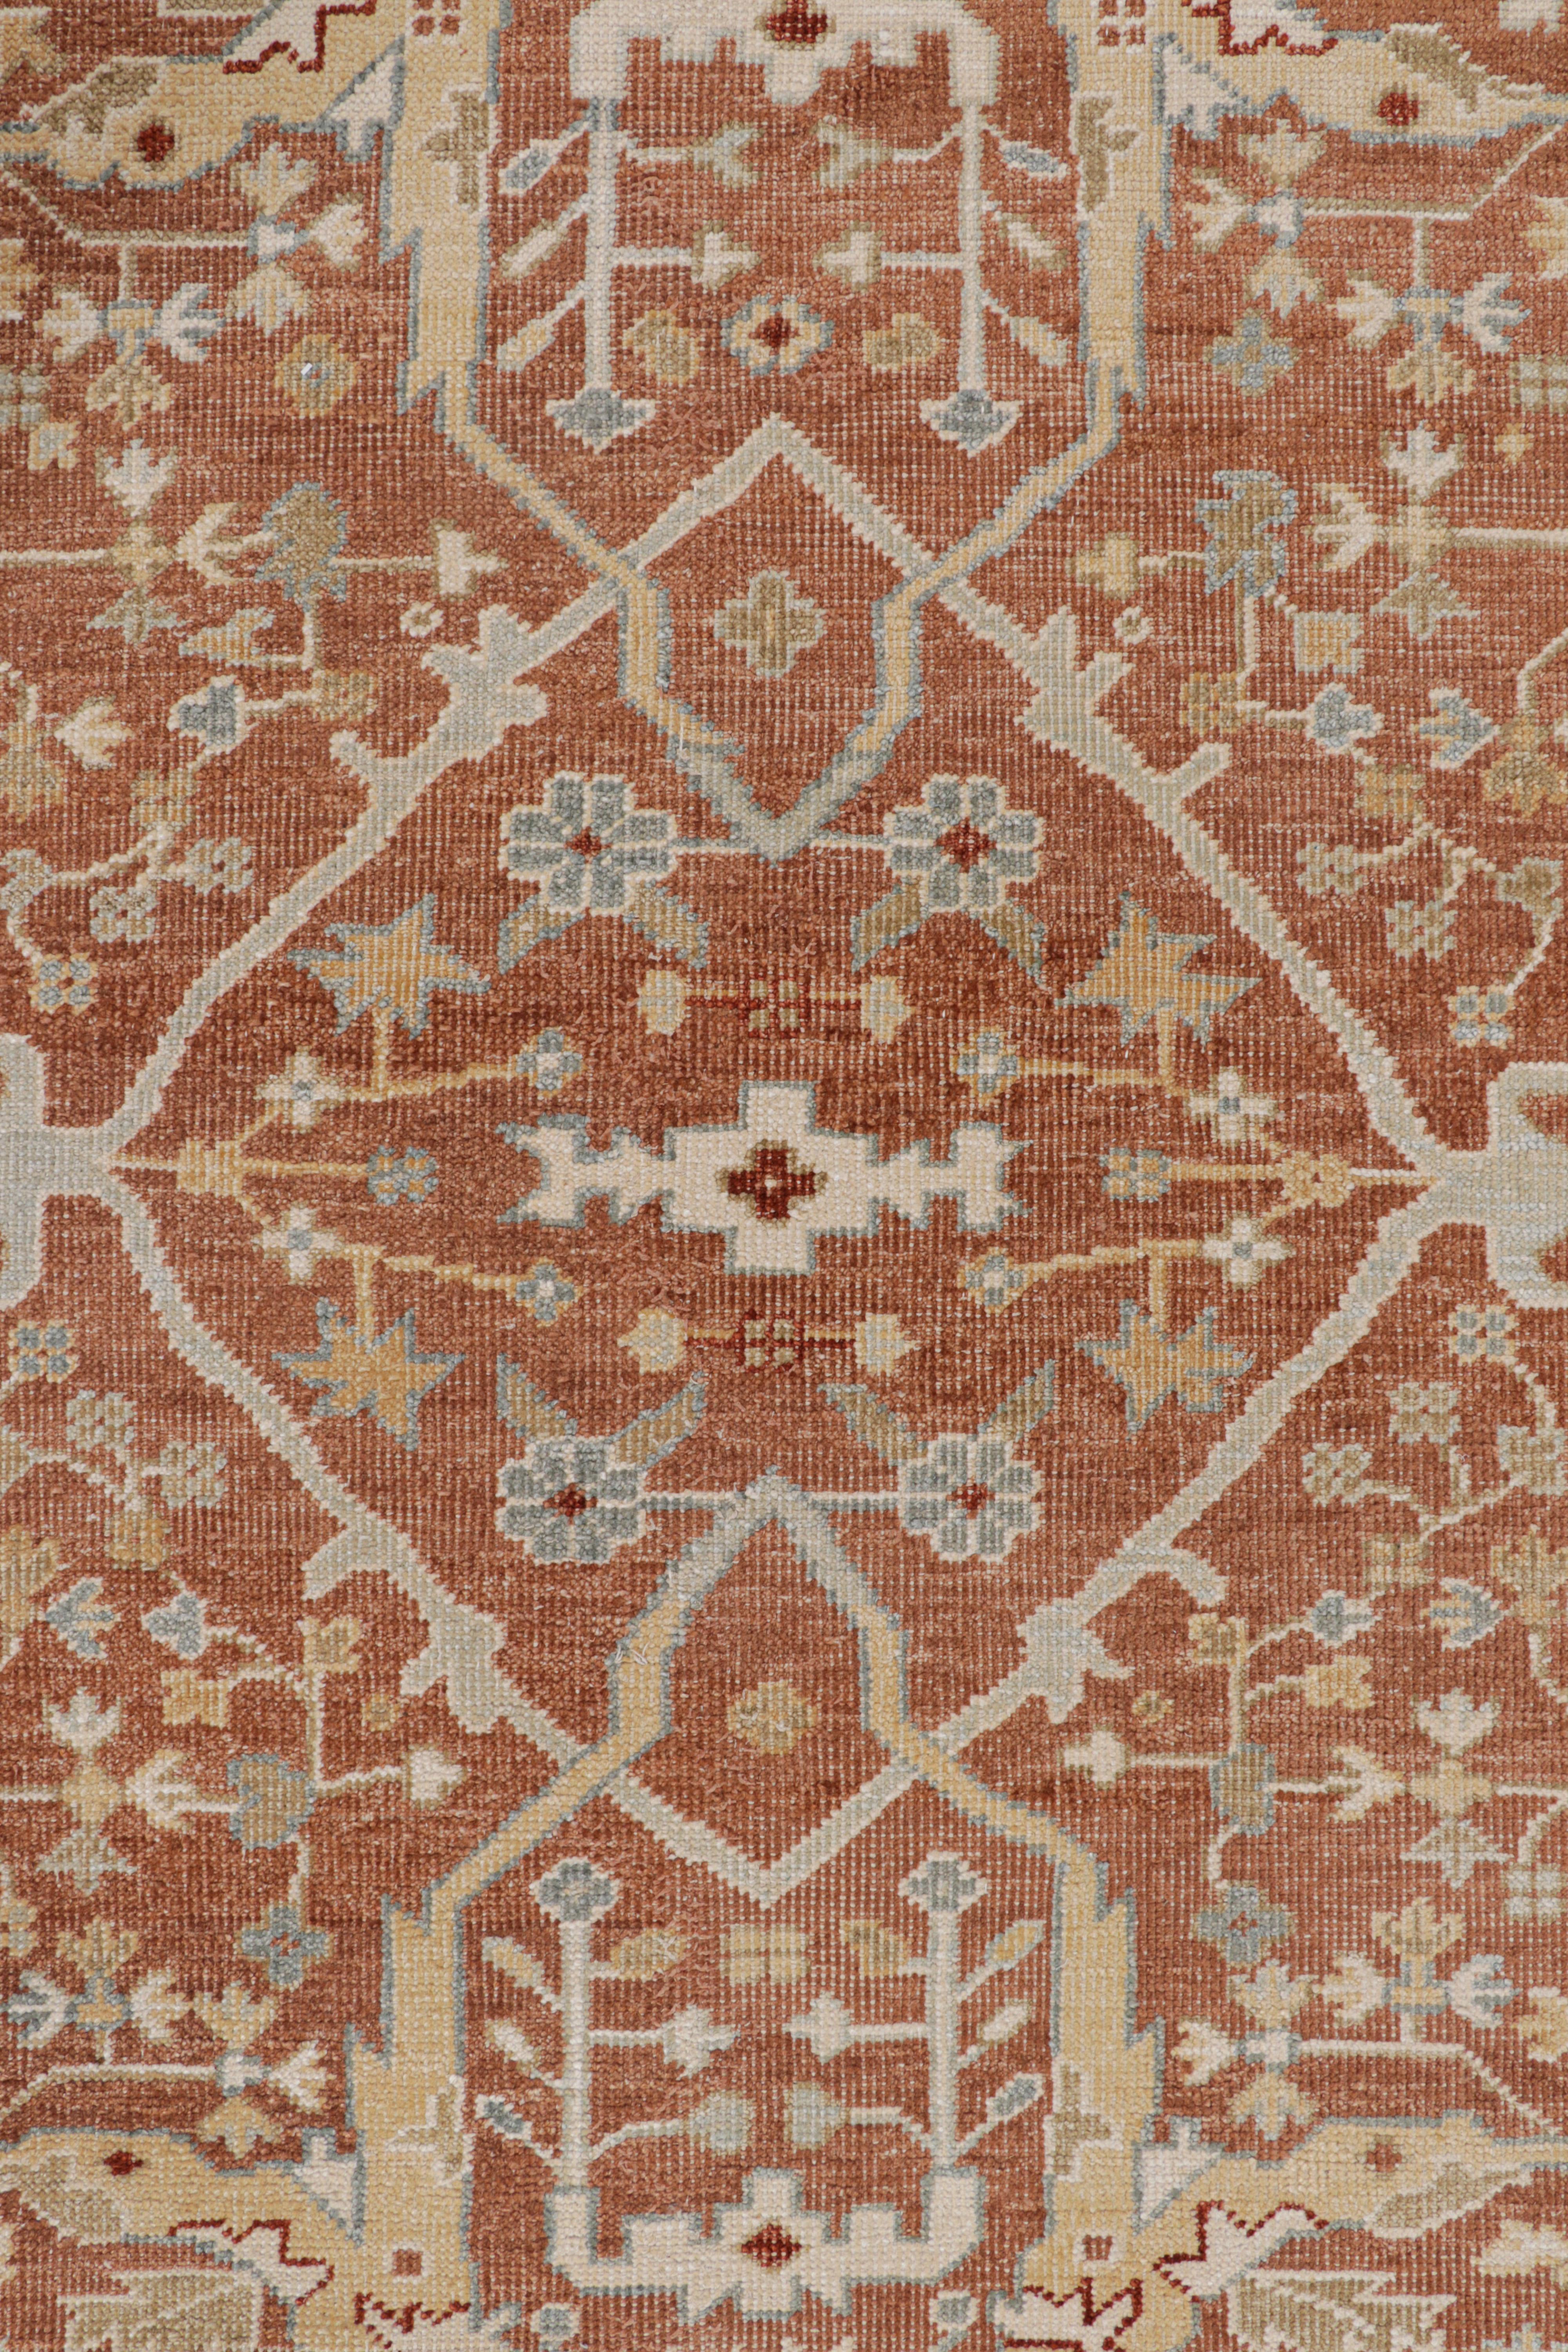 Indian Rug & Kilim’s Oushak Style Rug in Rust Tones with Floral Patterns For Sale